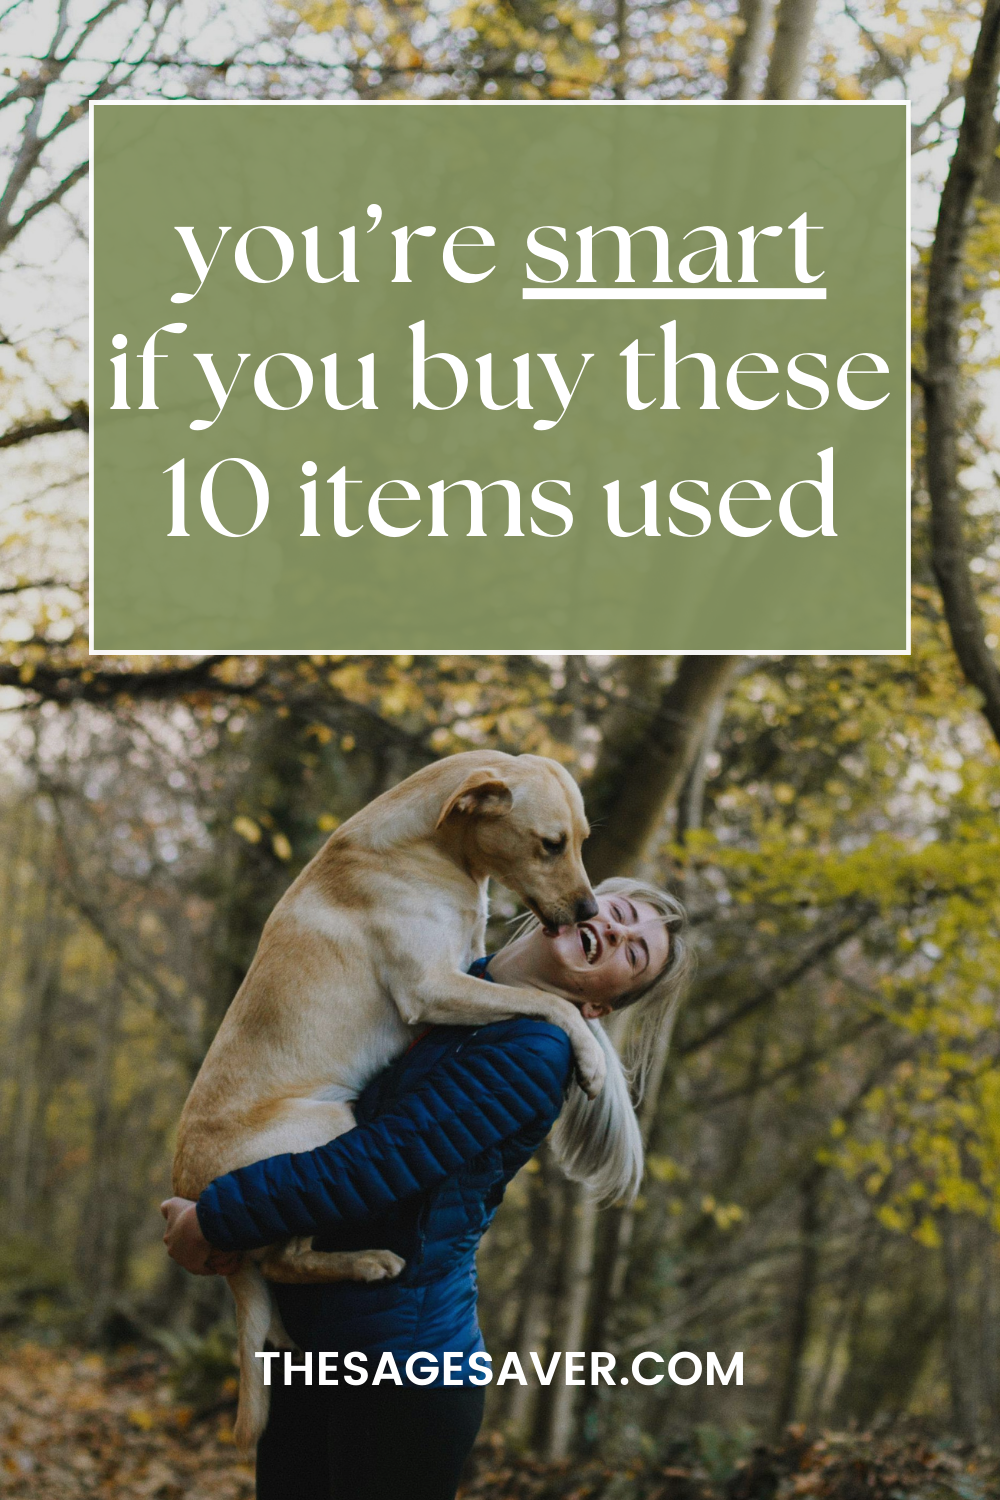 10 Things That Are Better To Buy Used